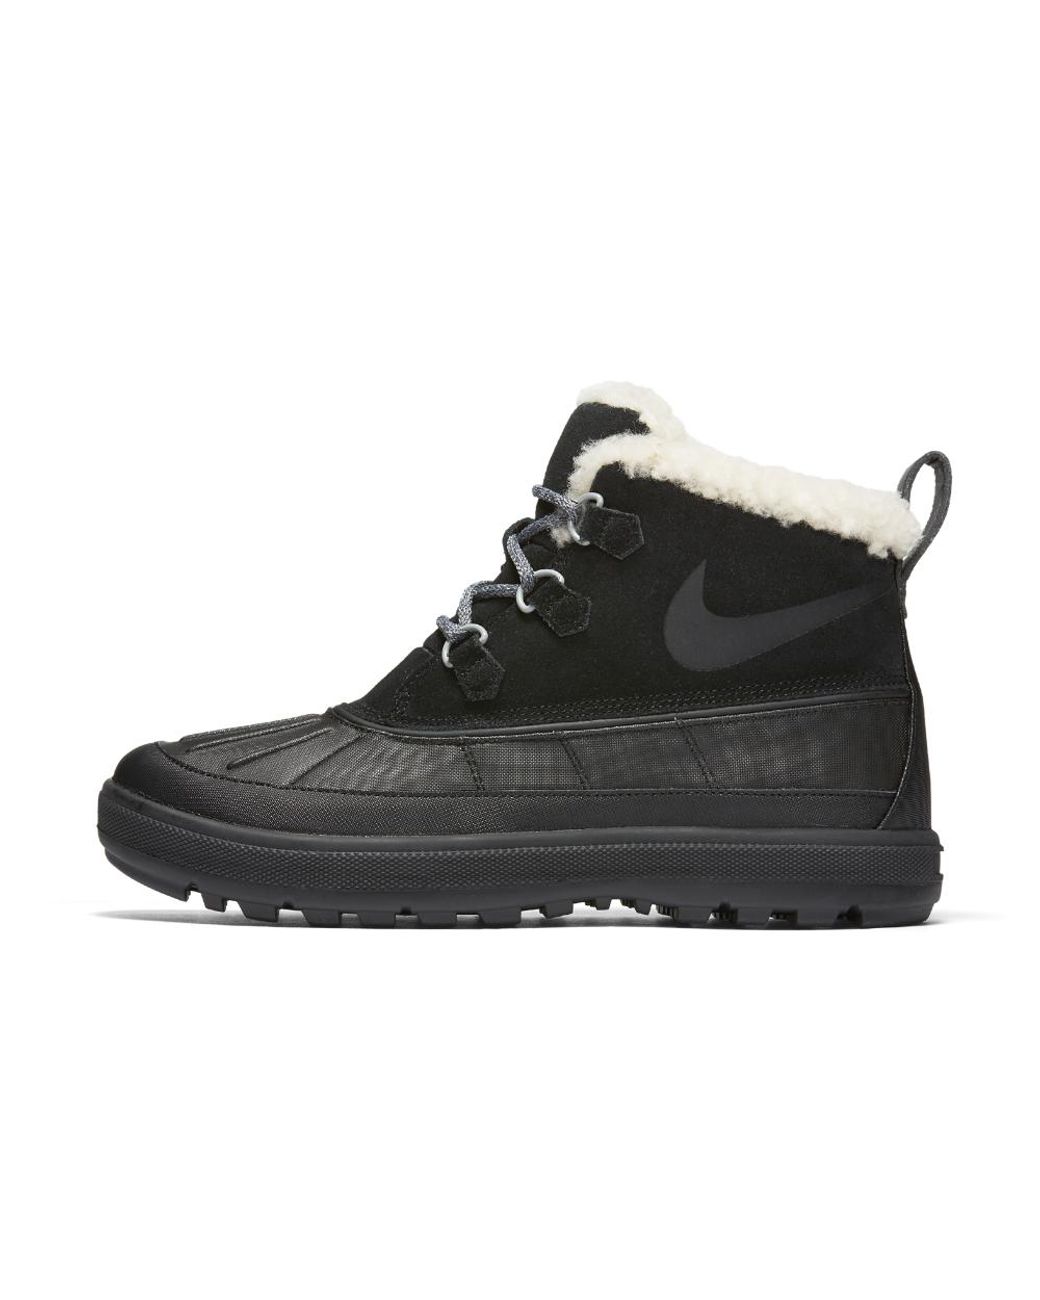 Nike Leather Woodside Chukka 2 Women's Boot in Black/Anthracite (Black) |  Lyst